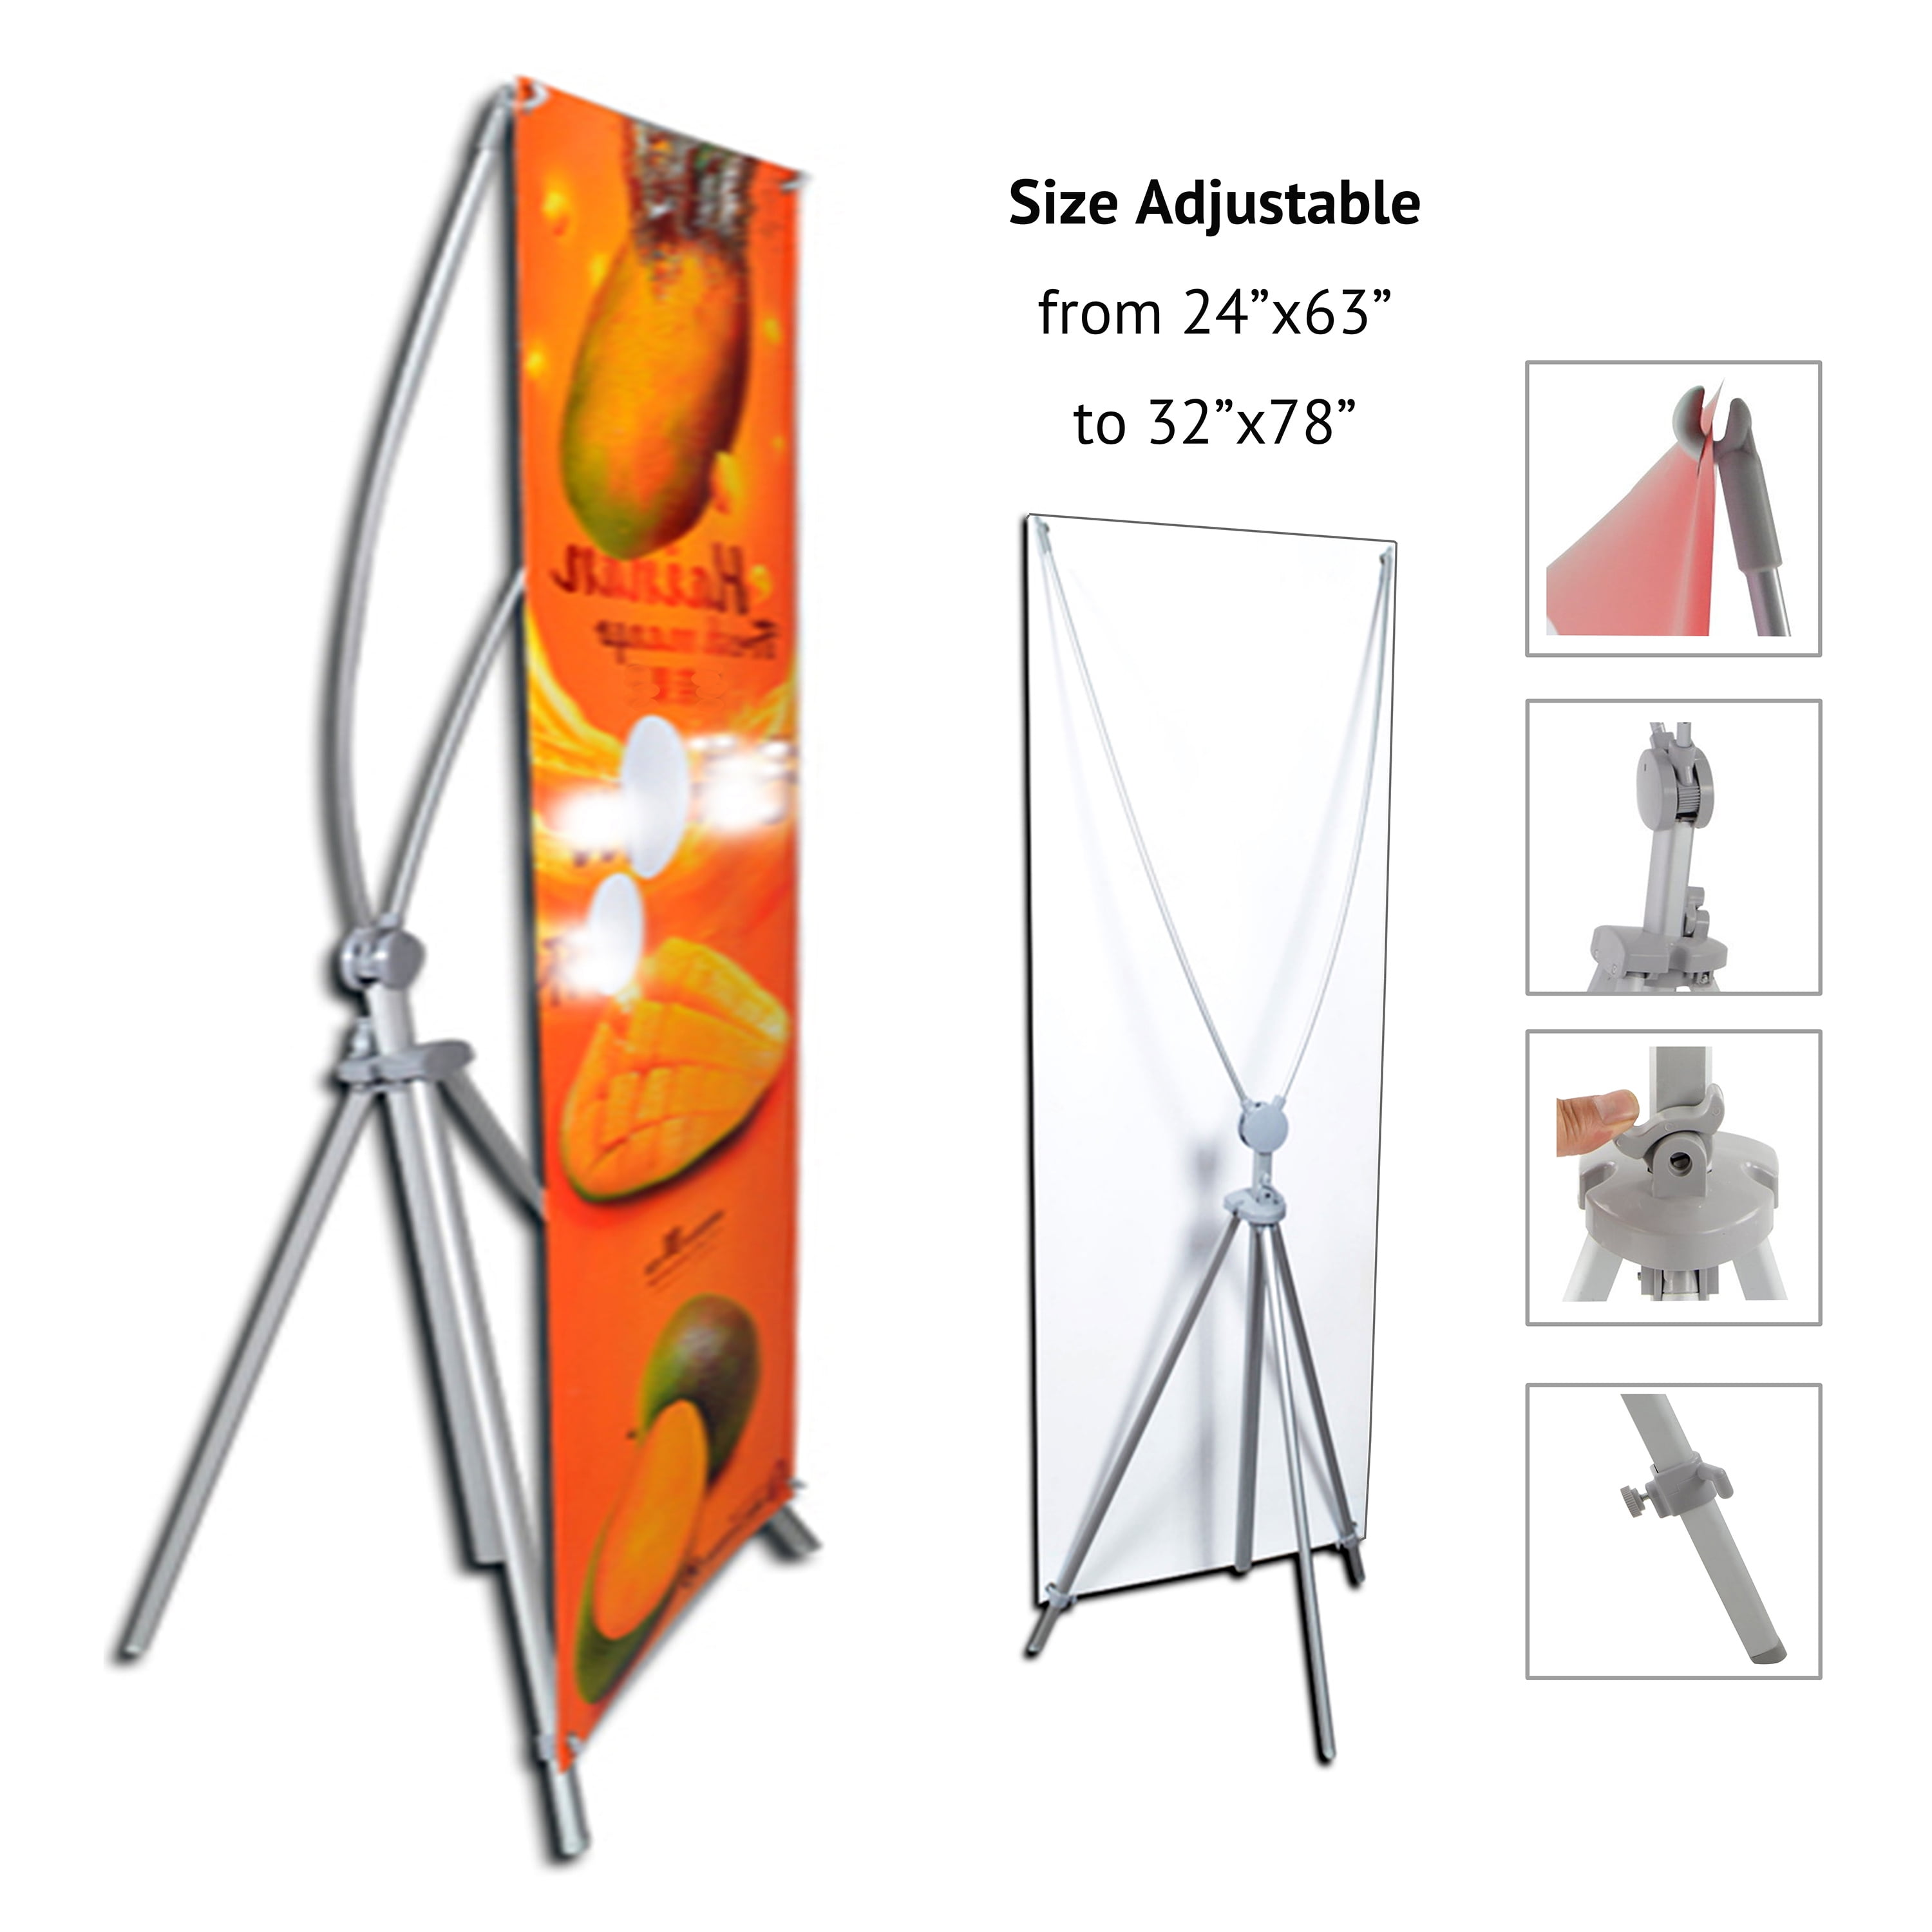 Premium Adjustable X Banner Stand Portable Oxford Bag 23"x63" to 32"x78" 